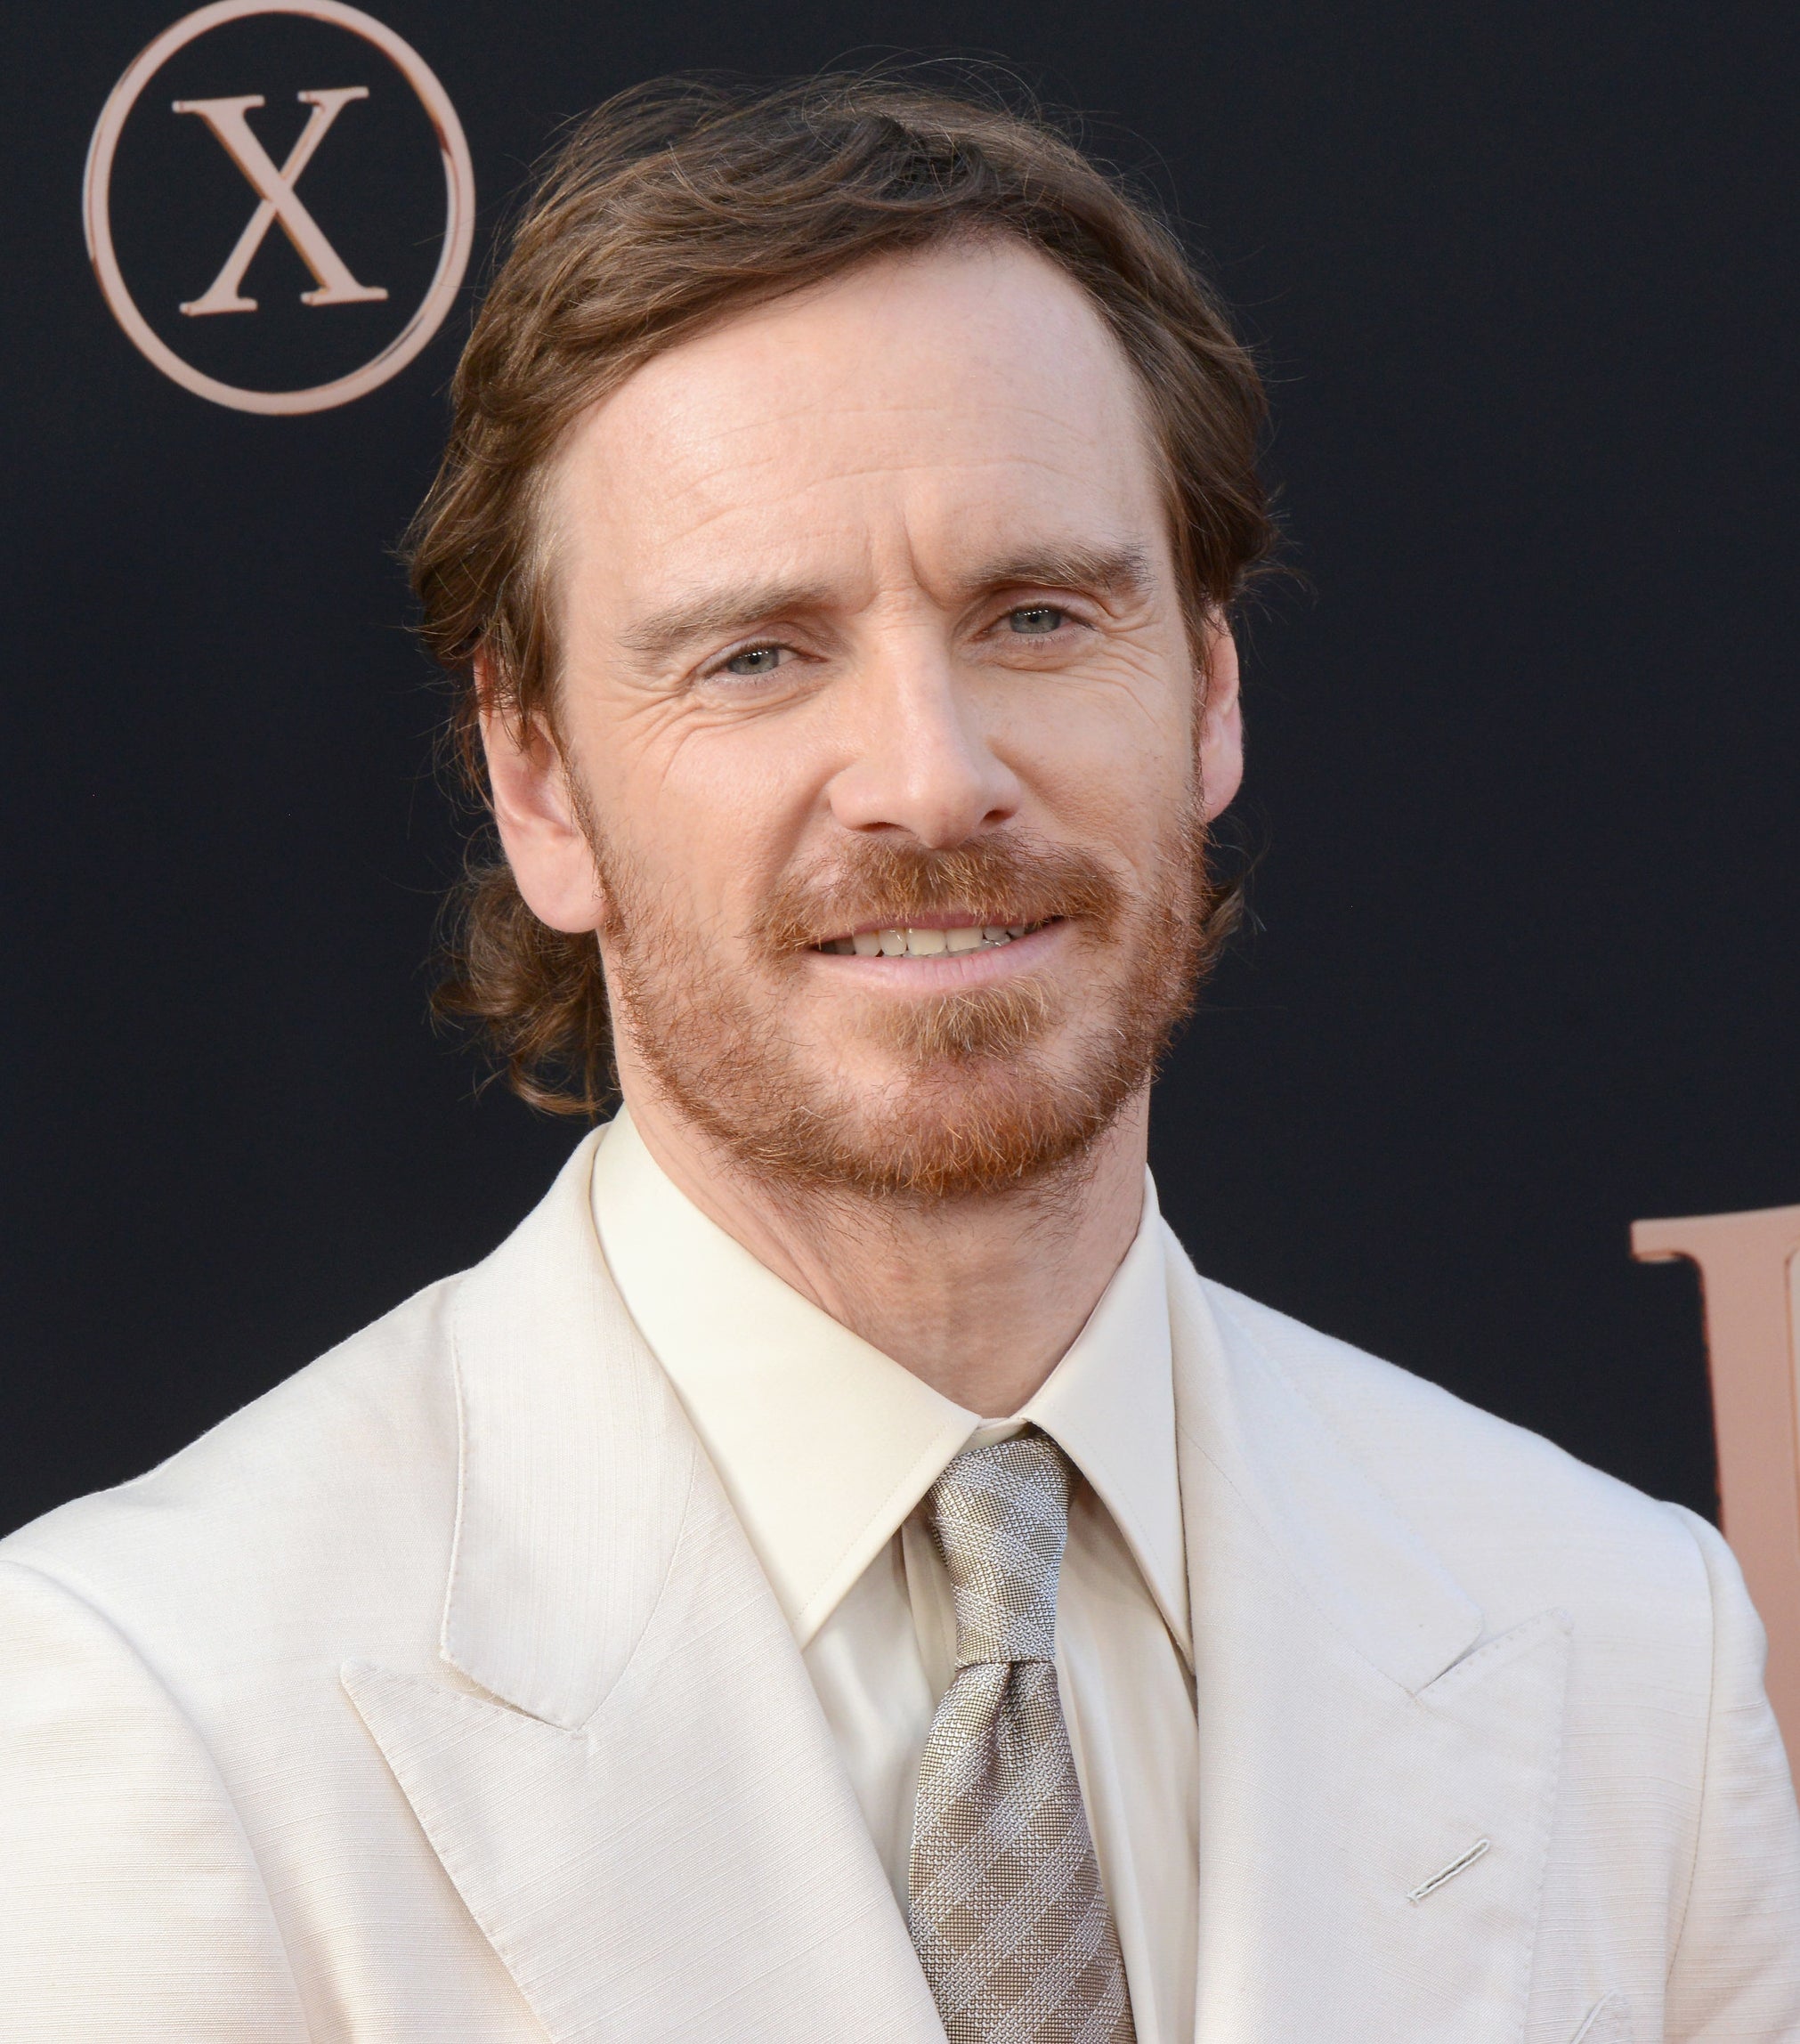 Michael Fassbender smiling at an event